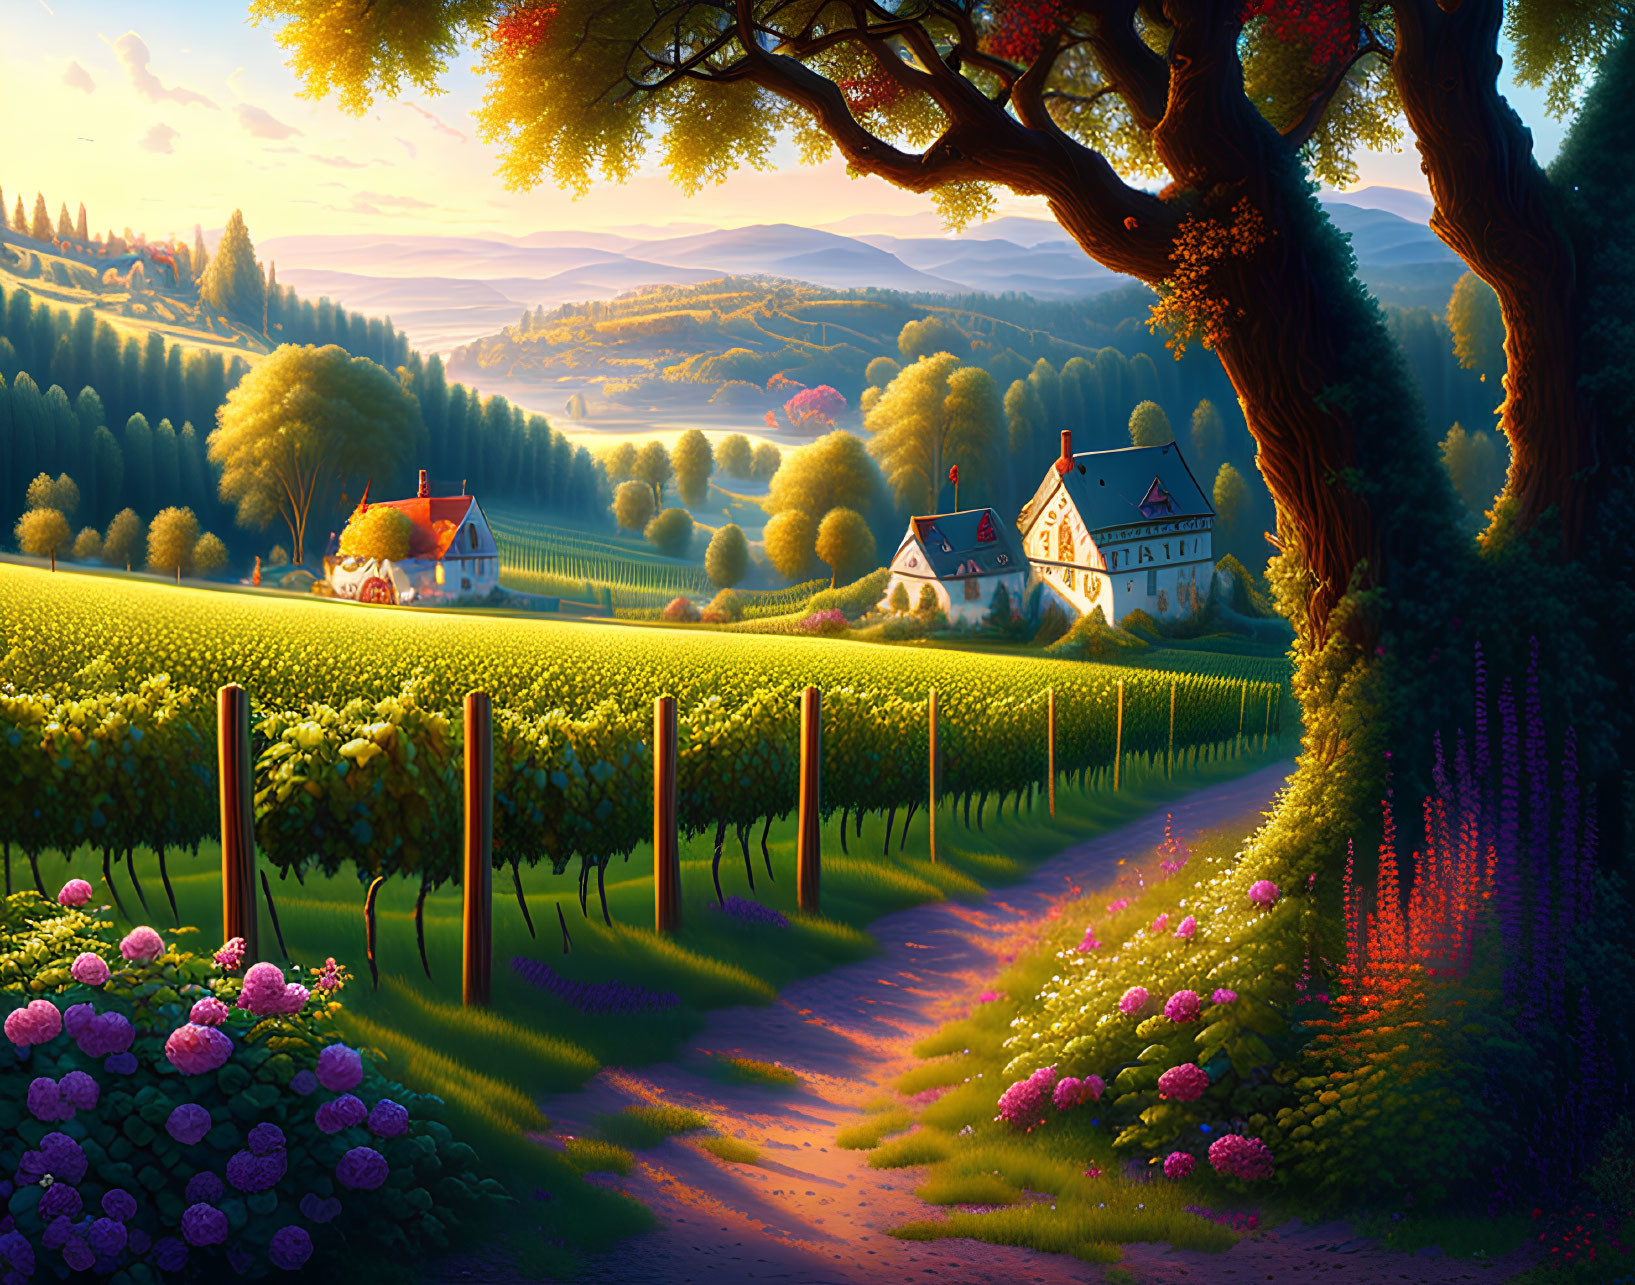 Tranquil sunset landscape with vineyards, tree, path, and rolling hills